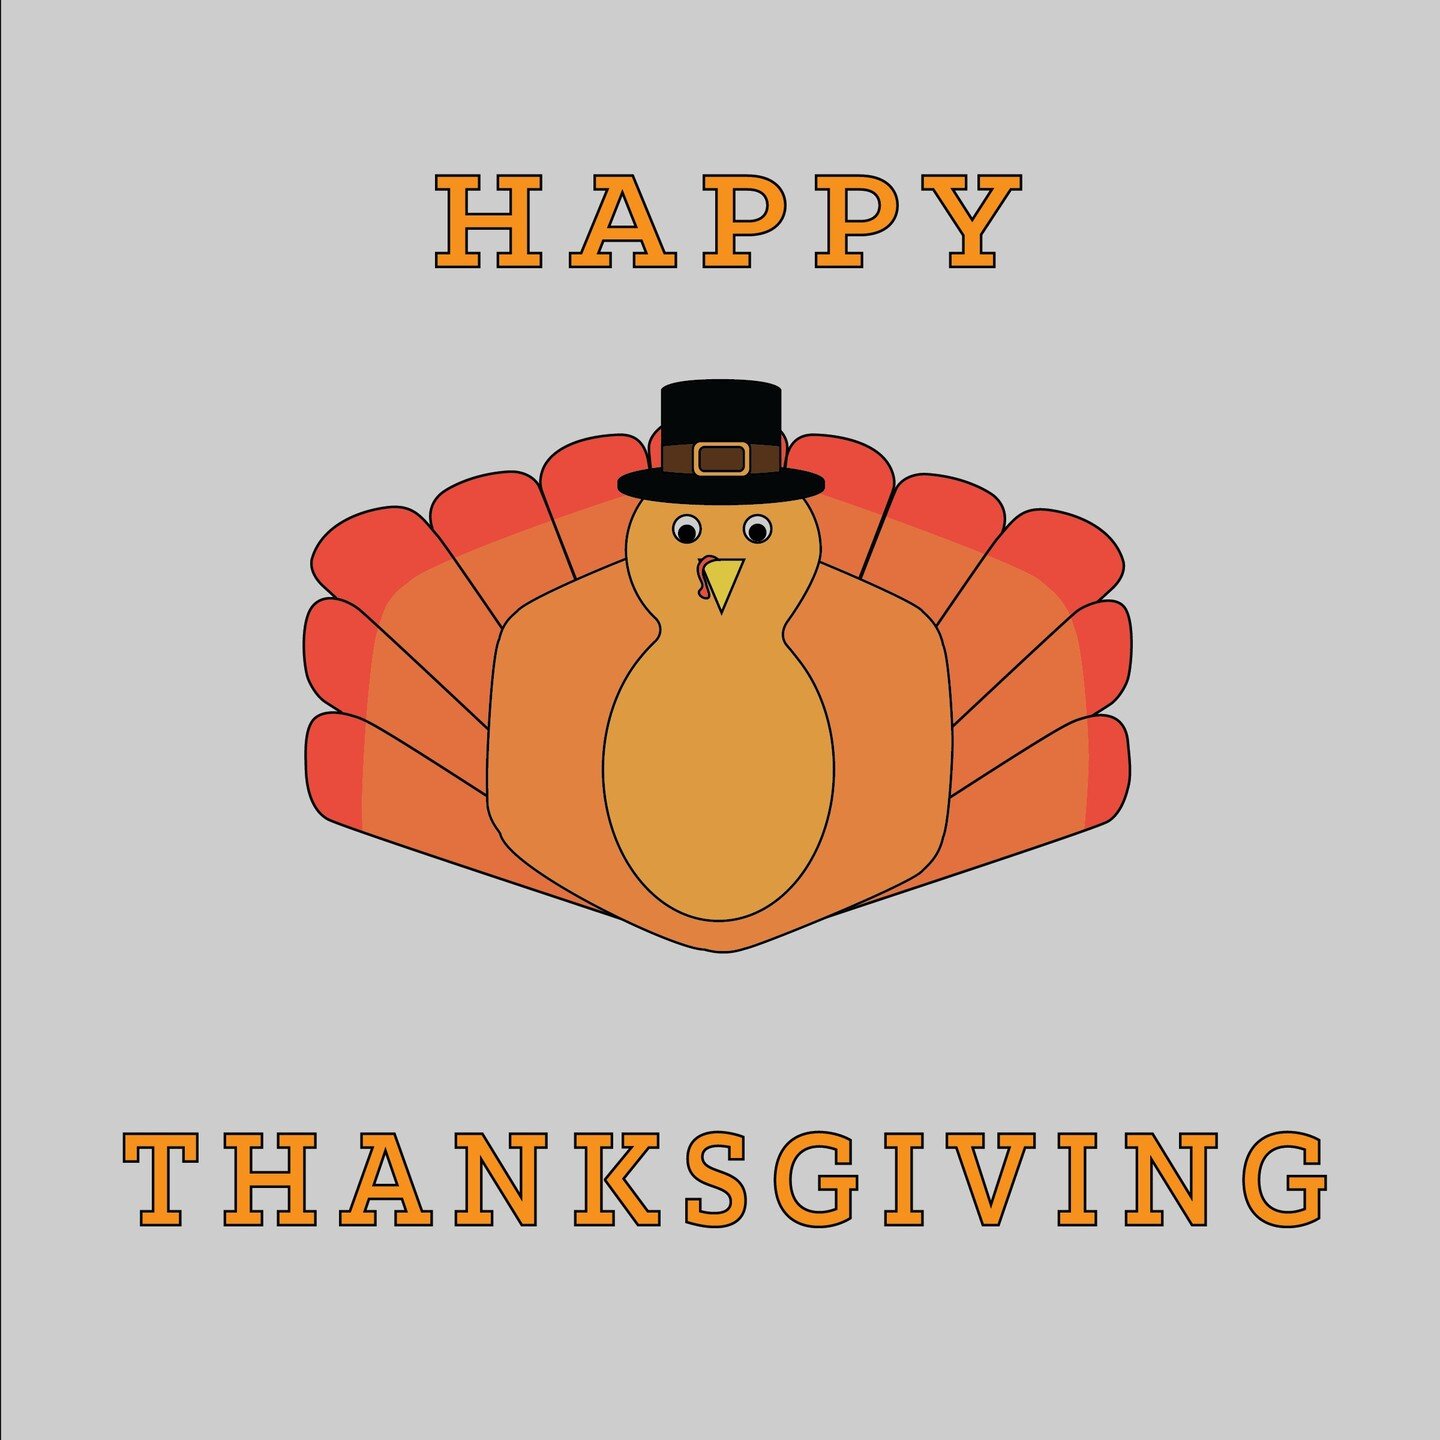 Happy Thanksgiving! 

We're thankful for our clients, our coworkers, and a belly full of Thanksgiving food. What are you thankful for?

#HIVEdesign #Thanksgiving #TurkeyDay #architecture #design #kansascity #thankful